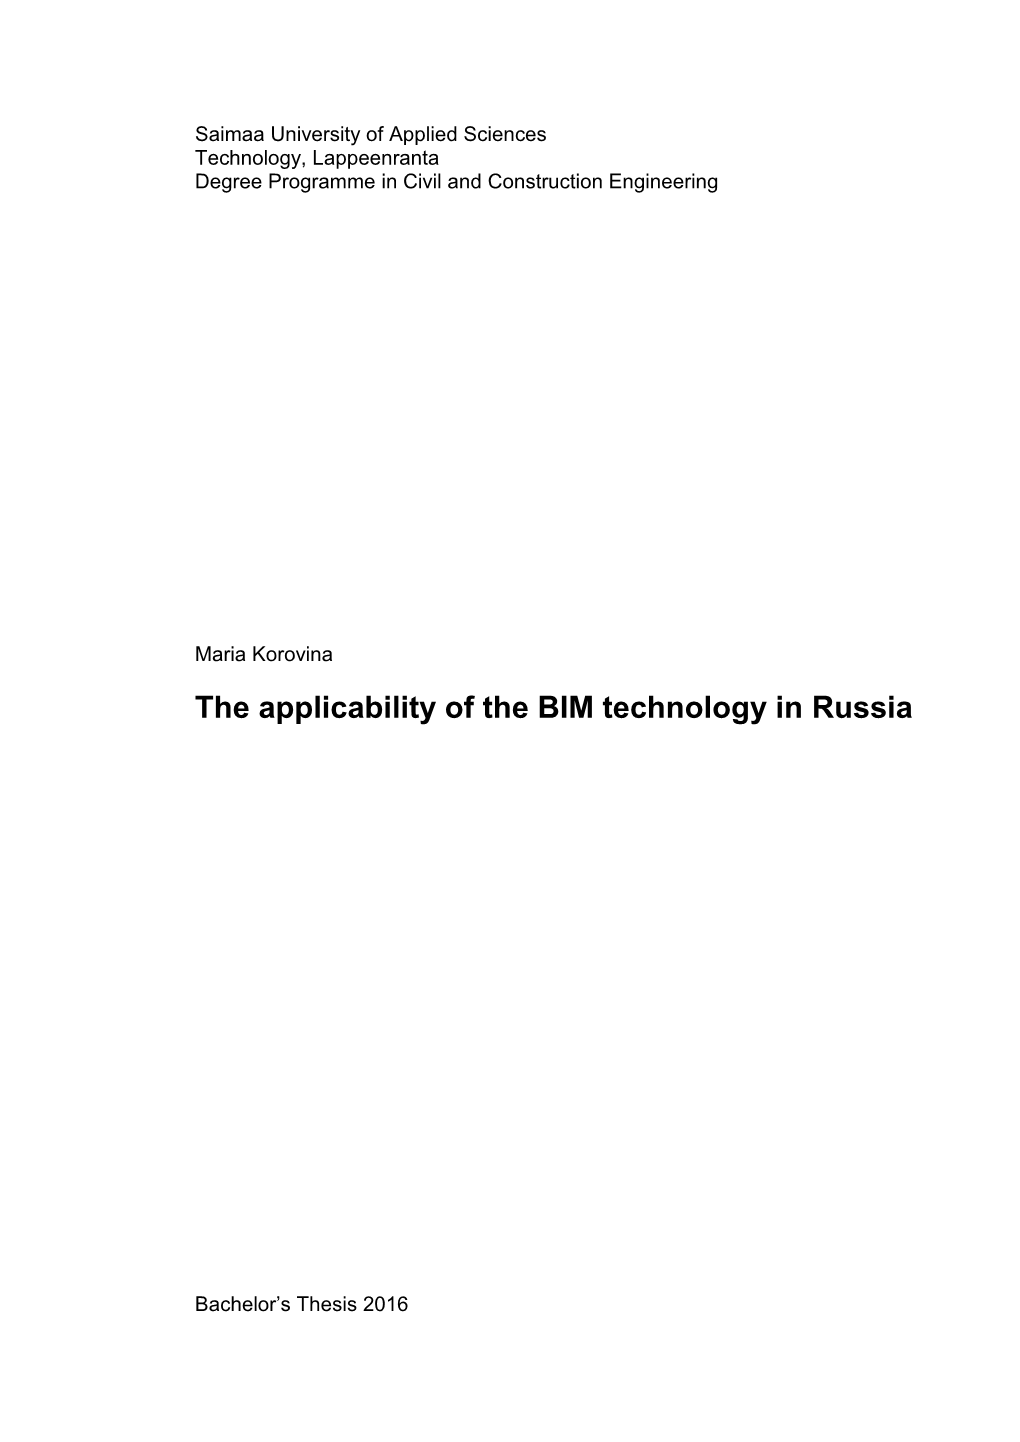 The Applicability of the BIM Technology in Russia